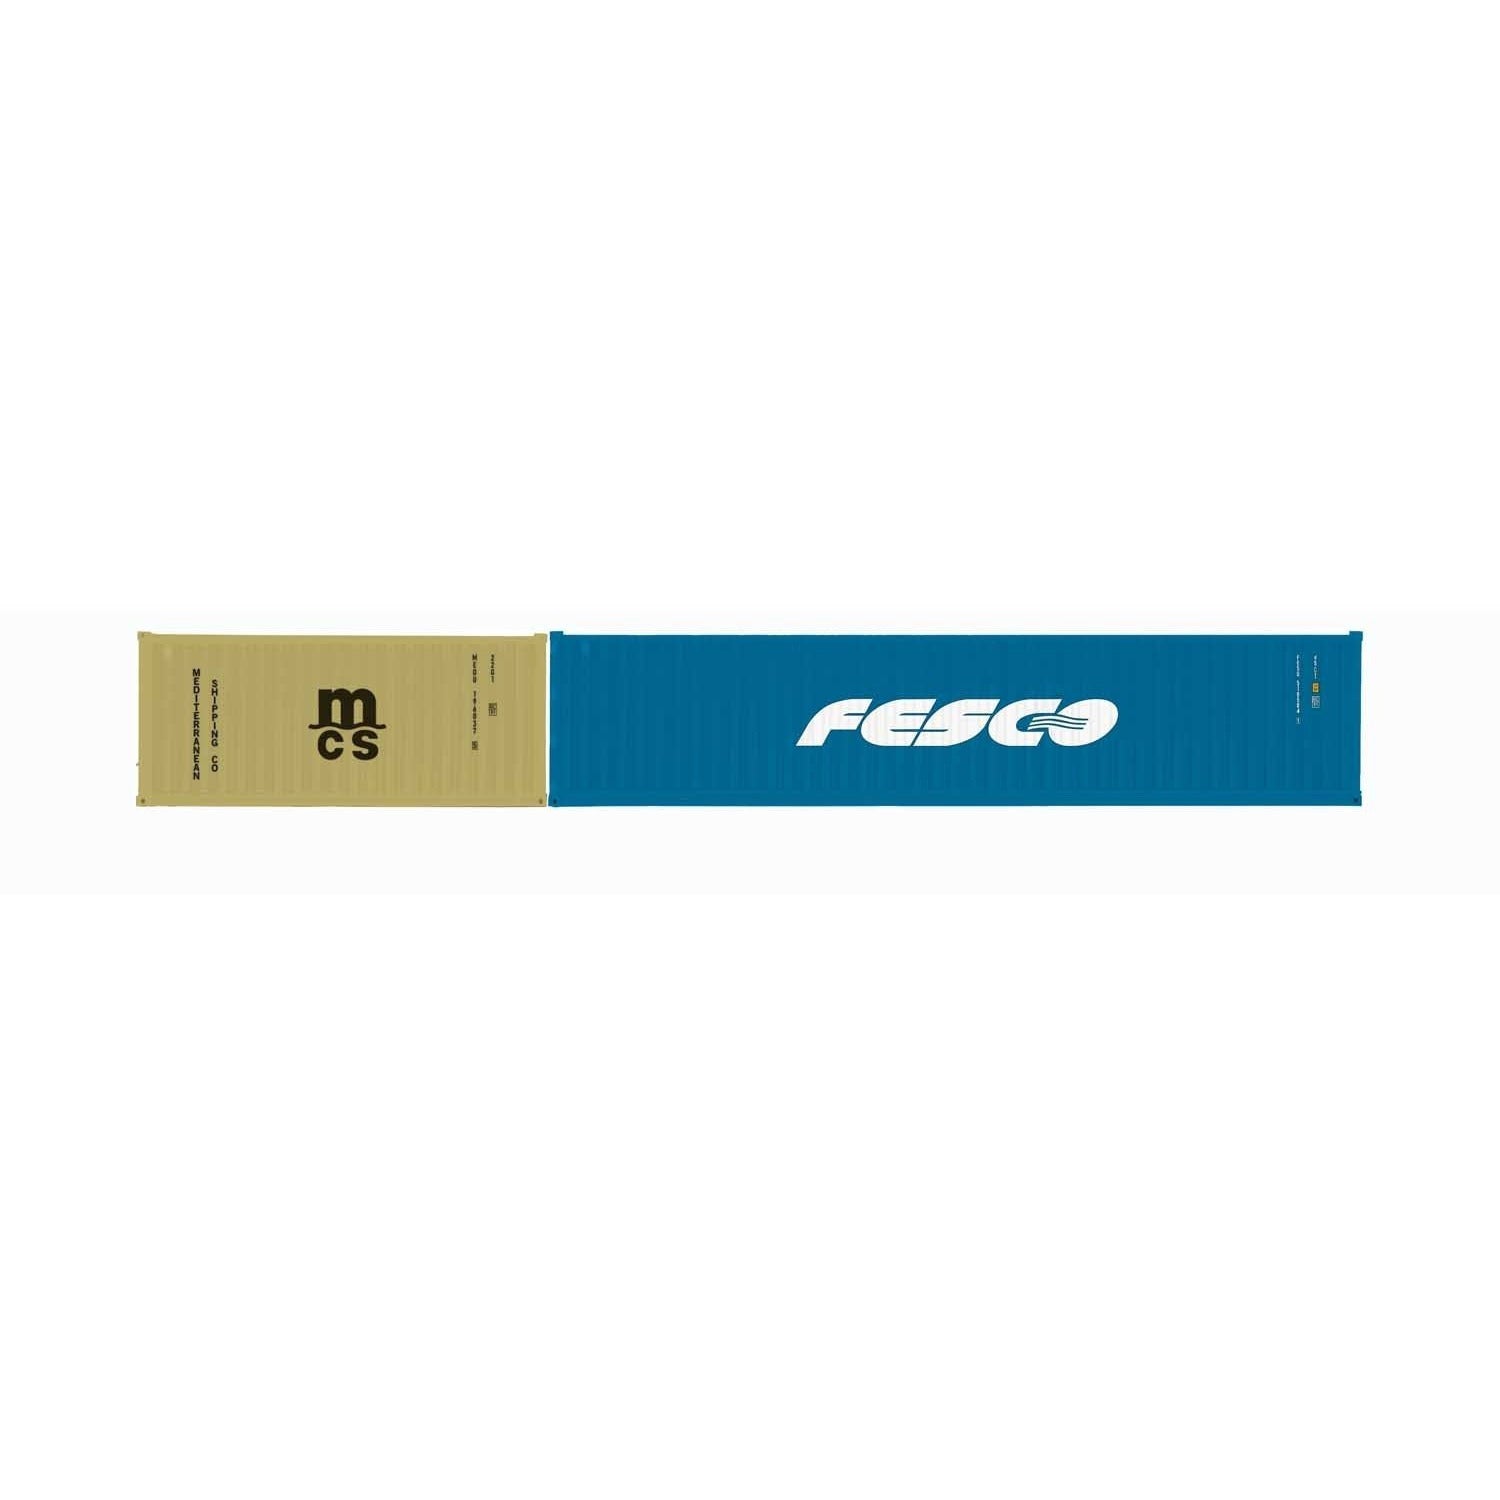 HORNBY MCS & Fesco, Container Pack, 1 x 20 and 1 x 40 Container